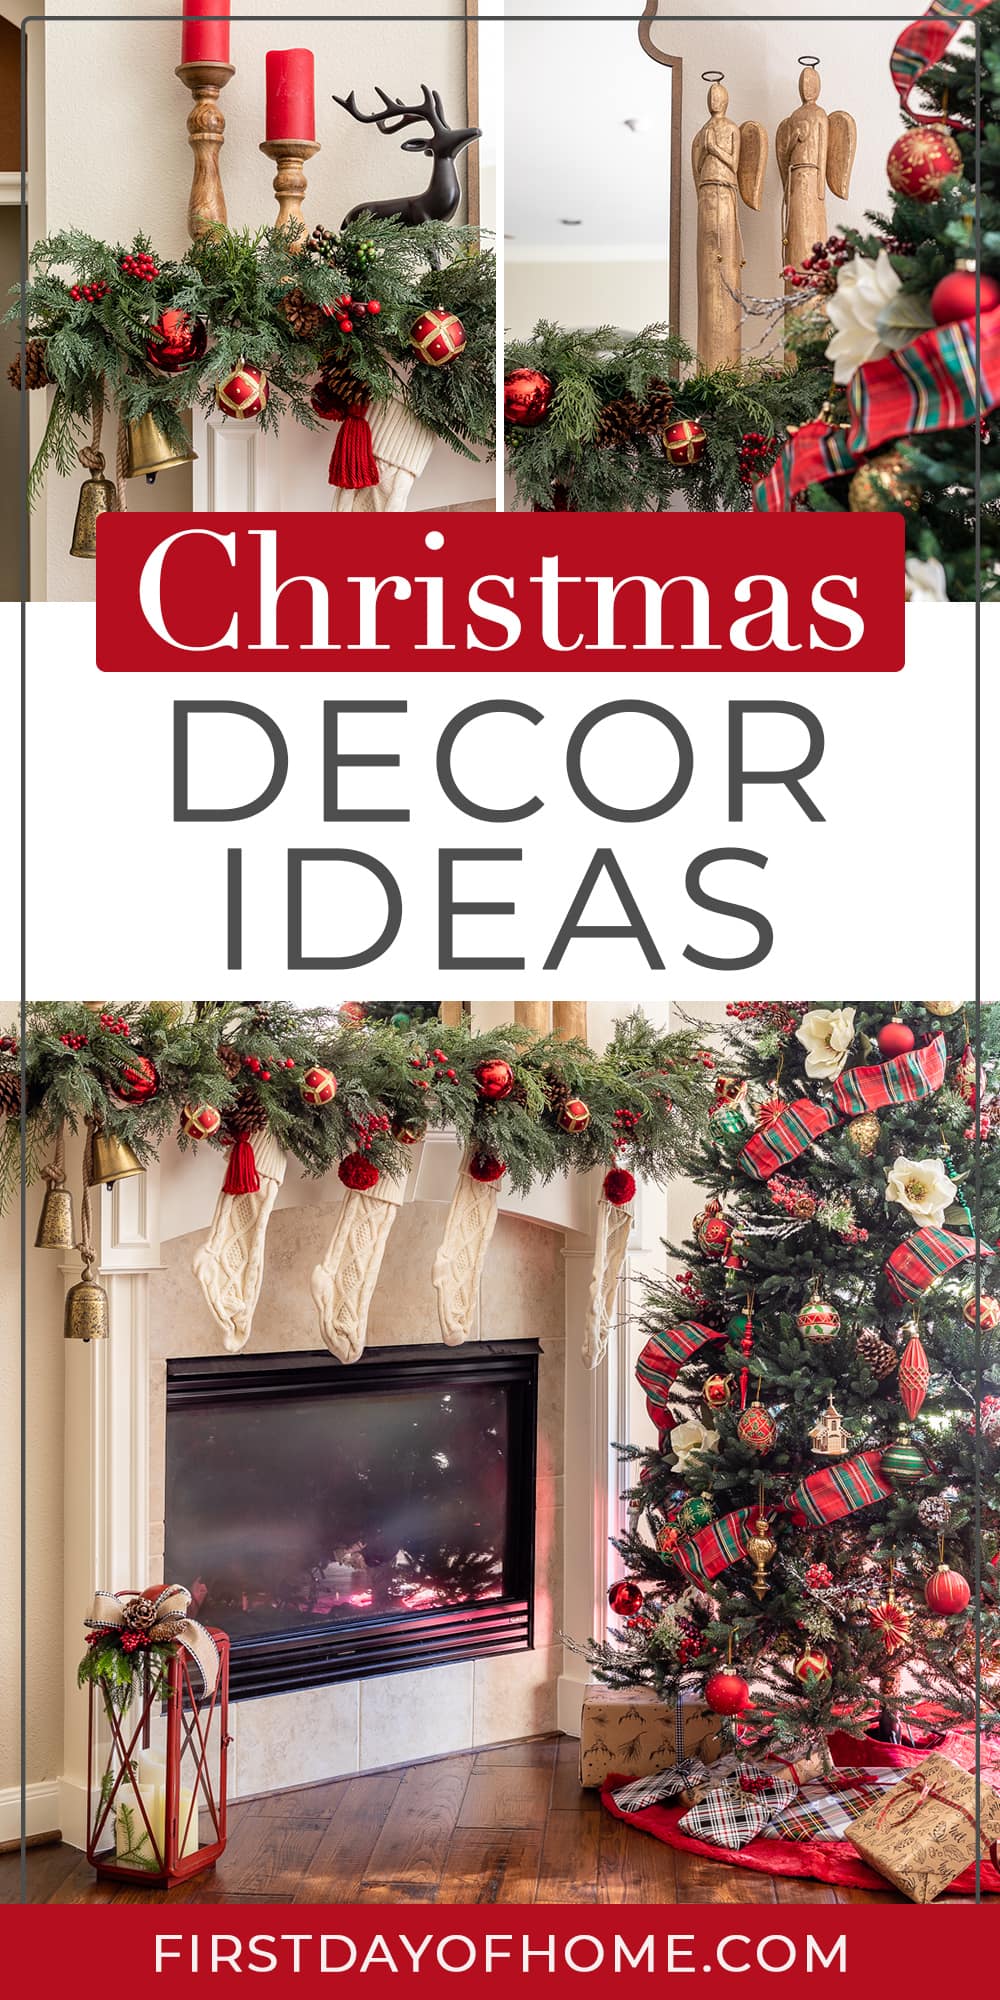 Collage of Christmas living room decor showing Christmas tree and fireplace mantel accents including candles, reindeer and angels. Text overlay reads "Christmas Decor Ideas"